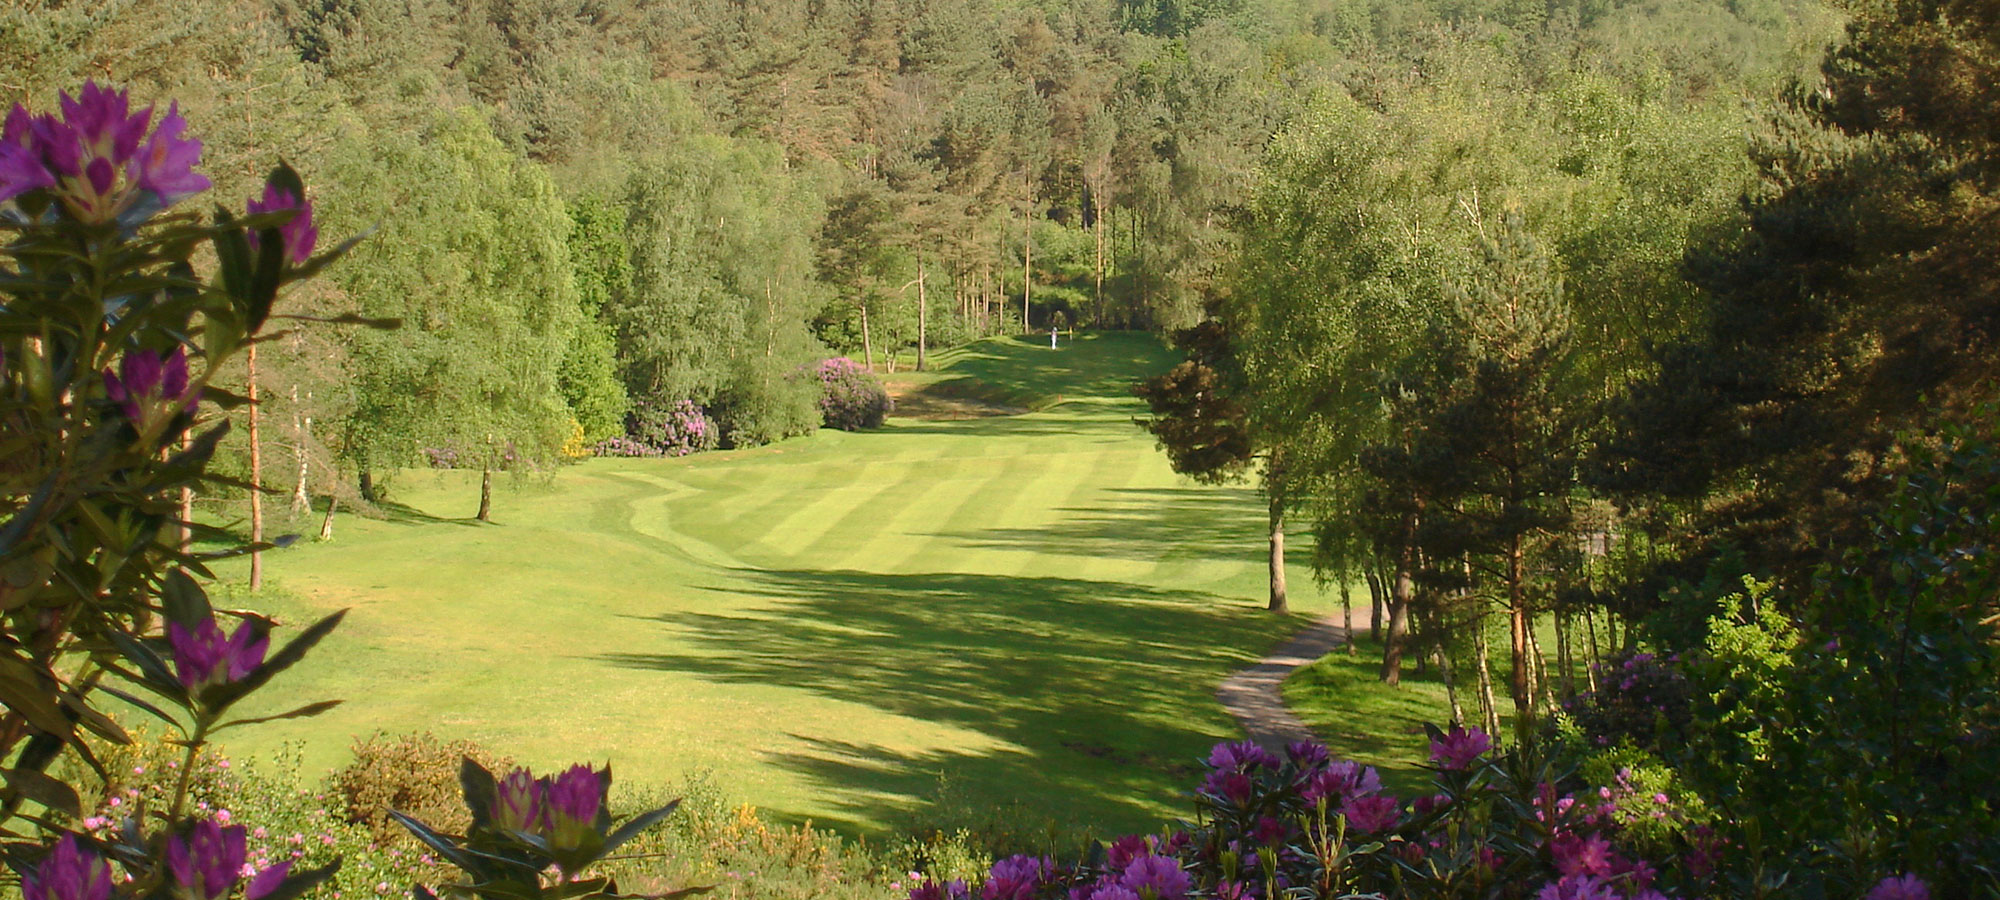 Planning a UK Golf Holiday? Everything you need to know about The Old Thorns Hotel & Resort